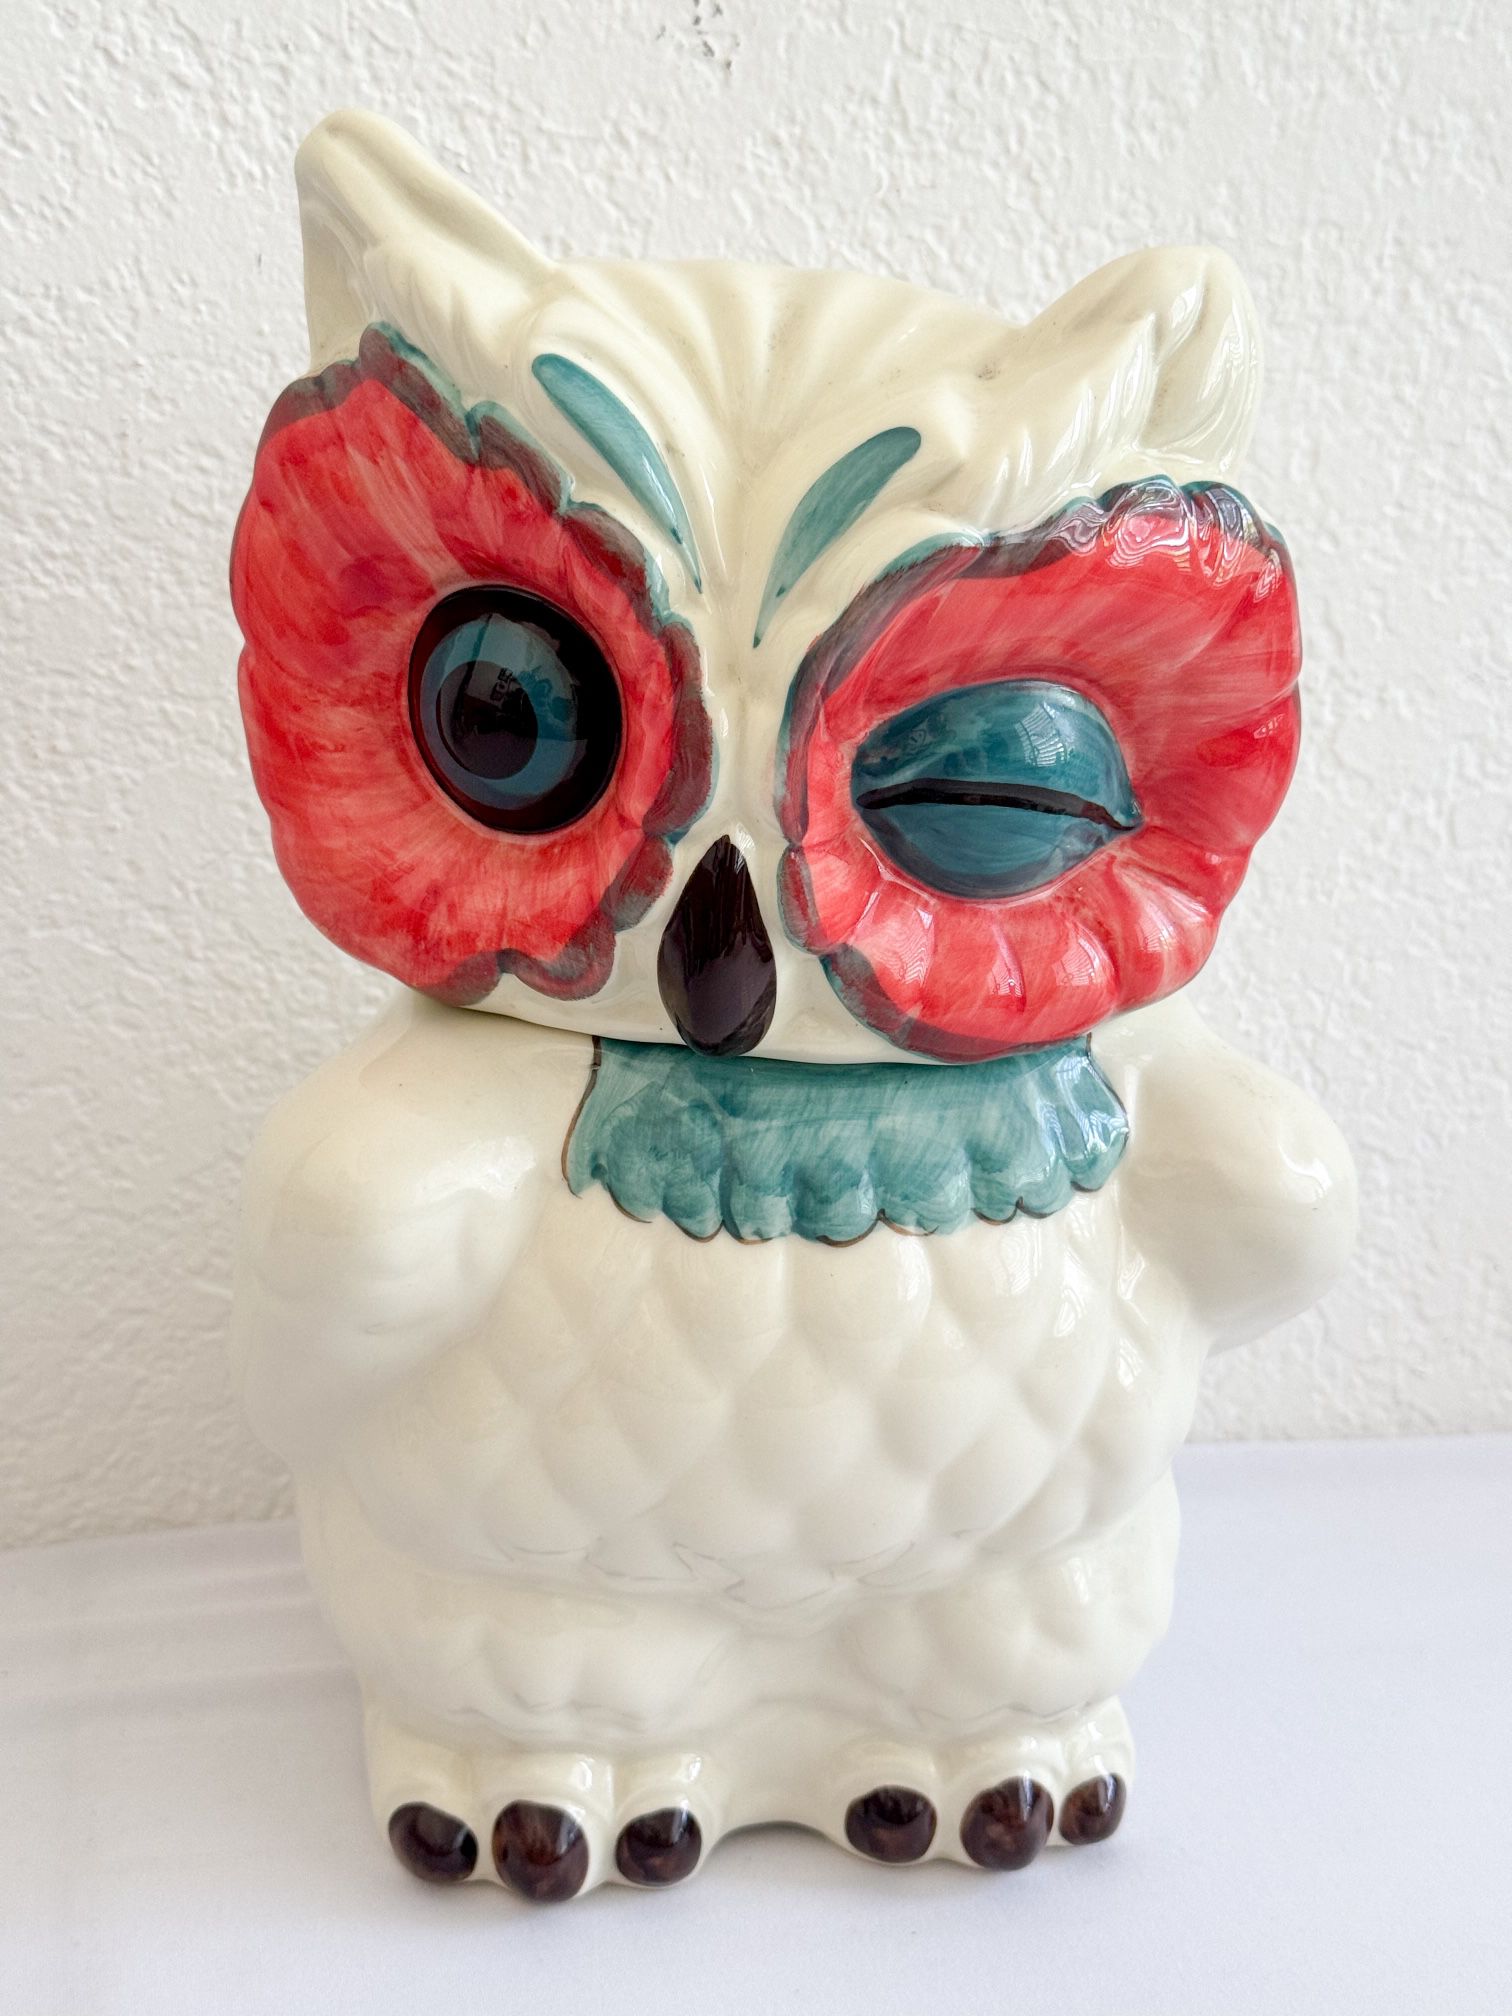 Anthropologie "A Real Hoot" Winking Owl Ceramic Cookie Jar Canister, 10.5”